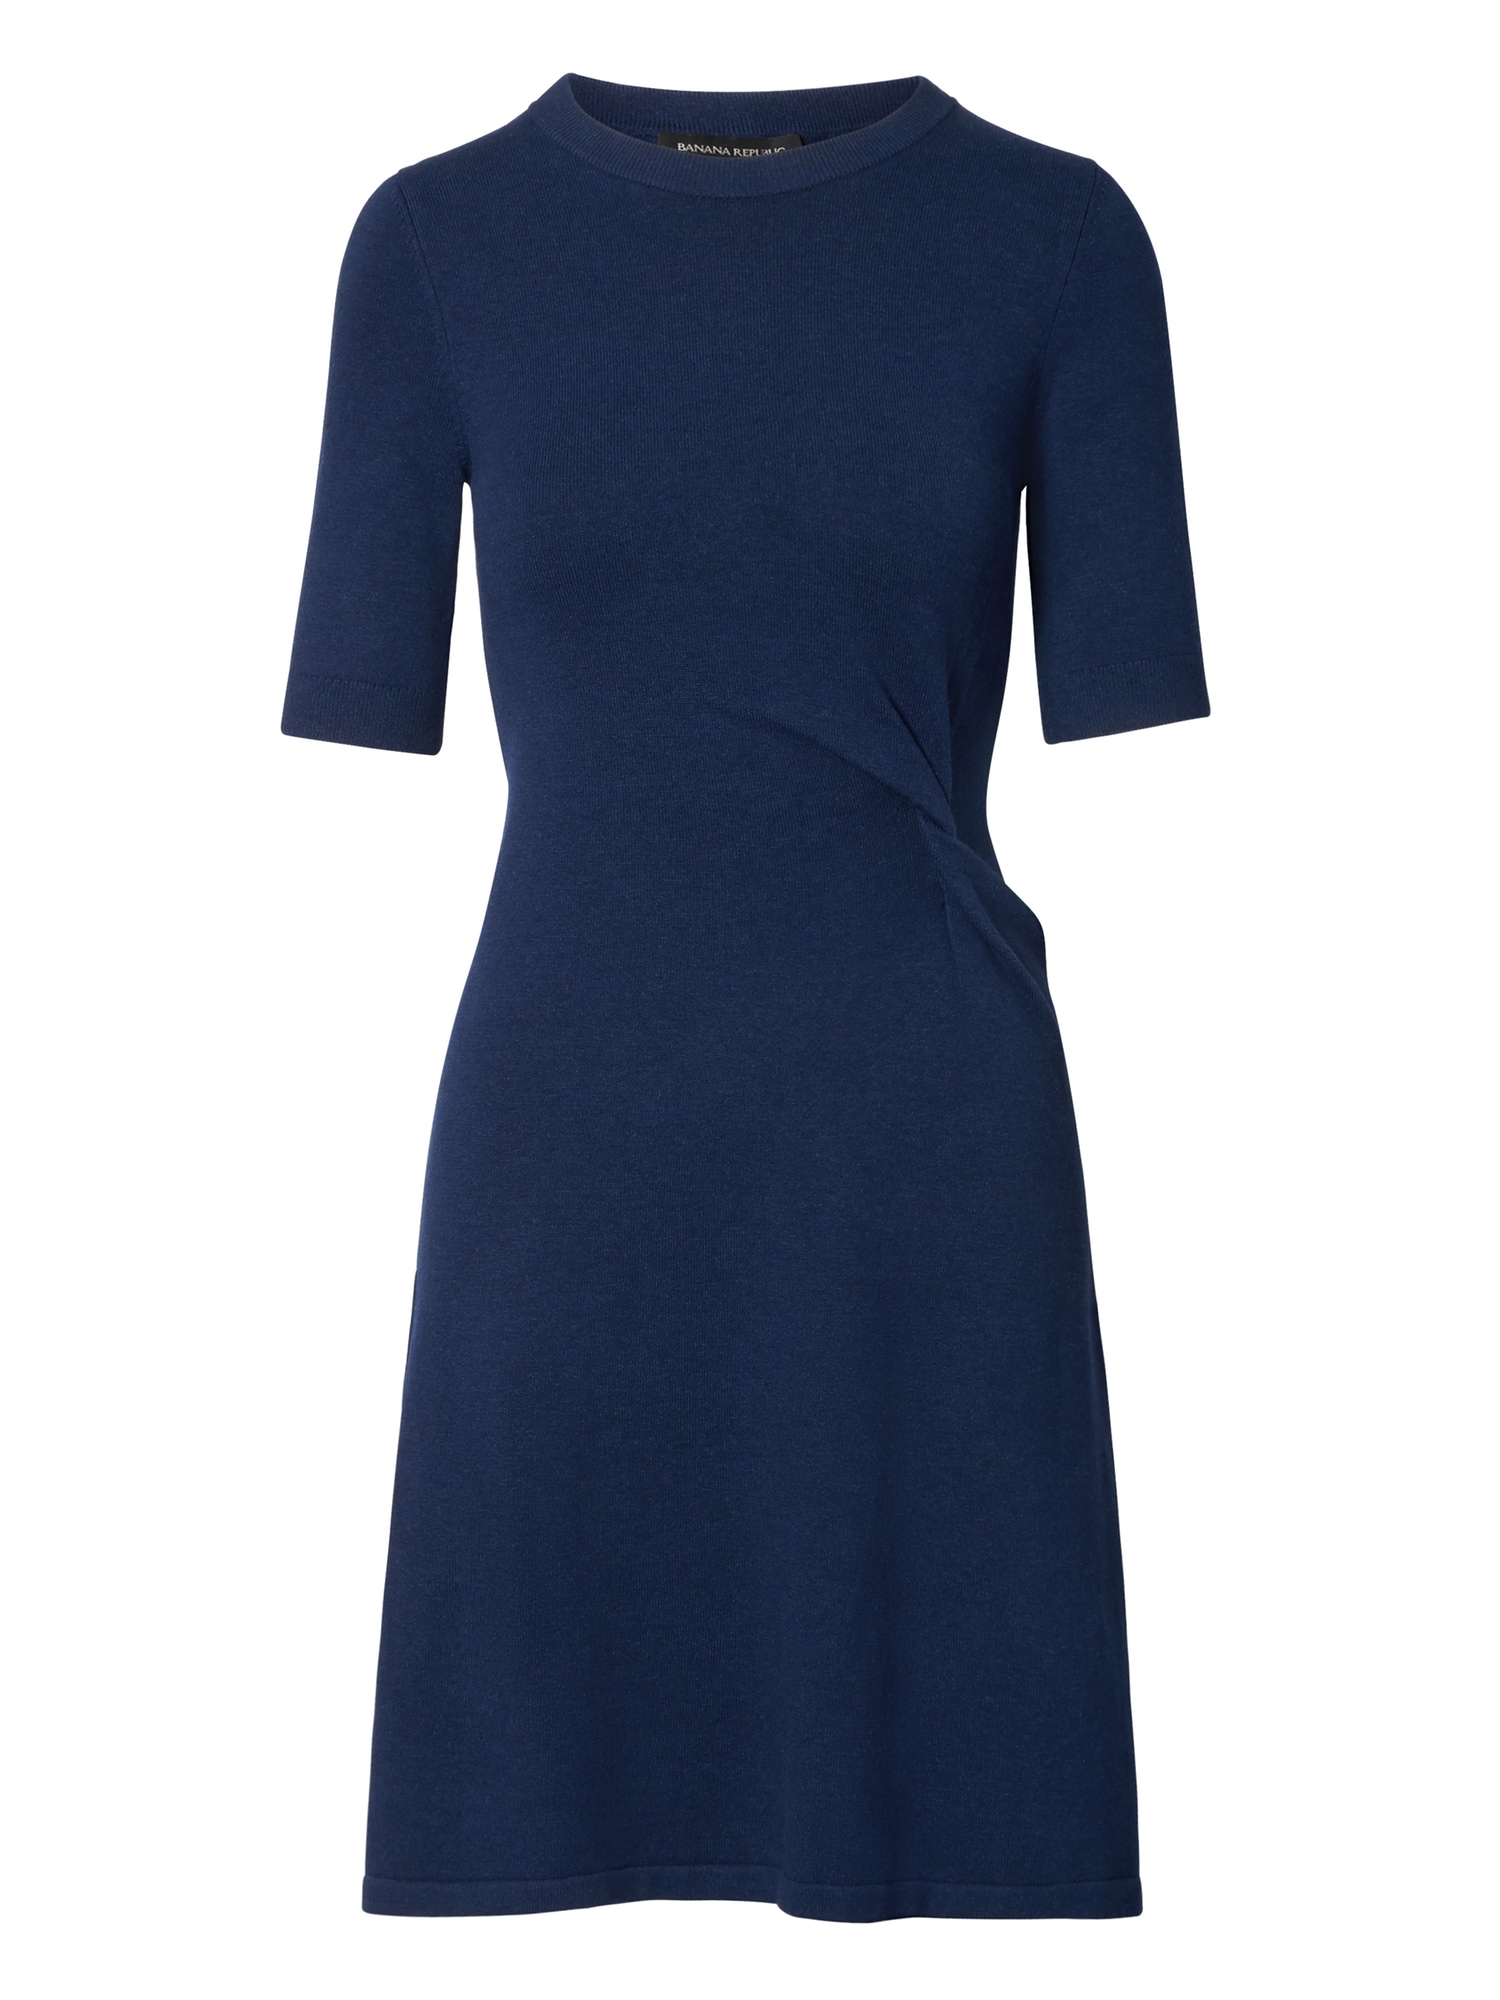 Knotted Fit-and-Flare Sweater Dress